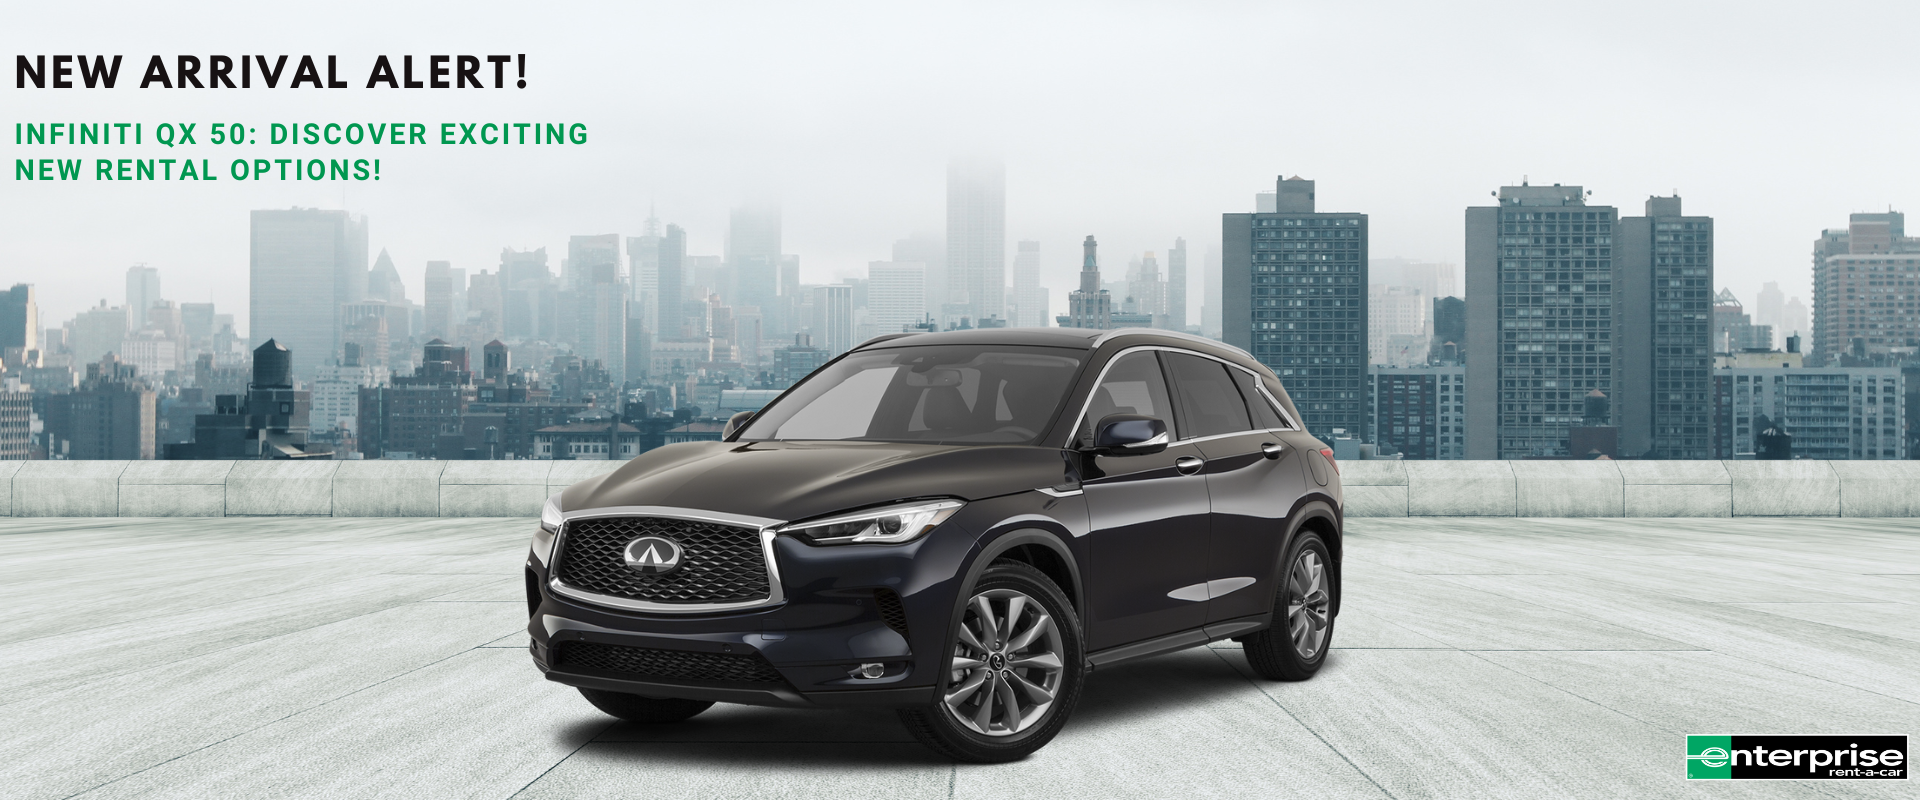 New Arrival Alert Infiniti QX 50: Discover excitin...